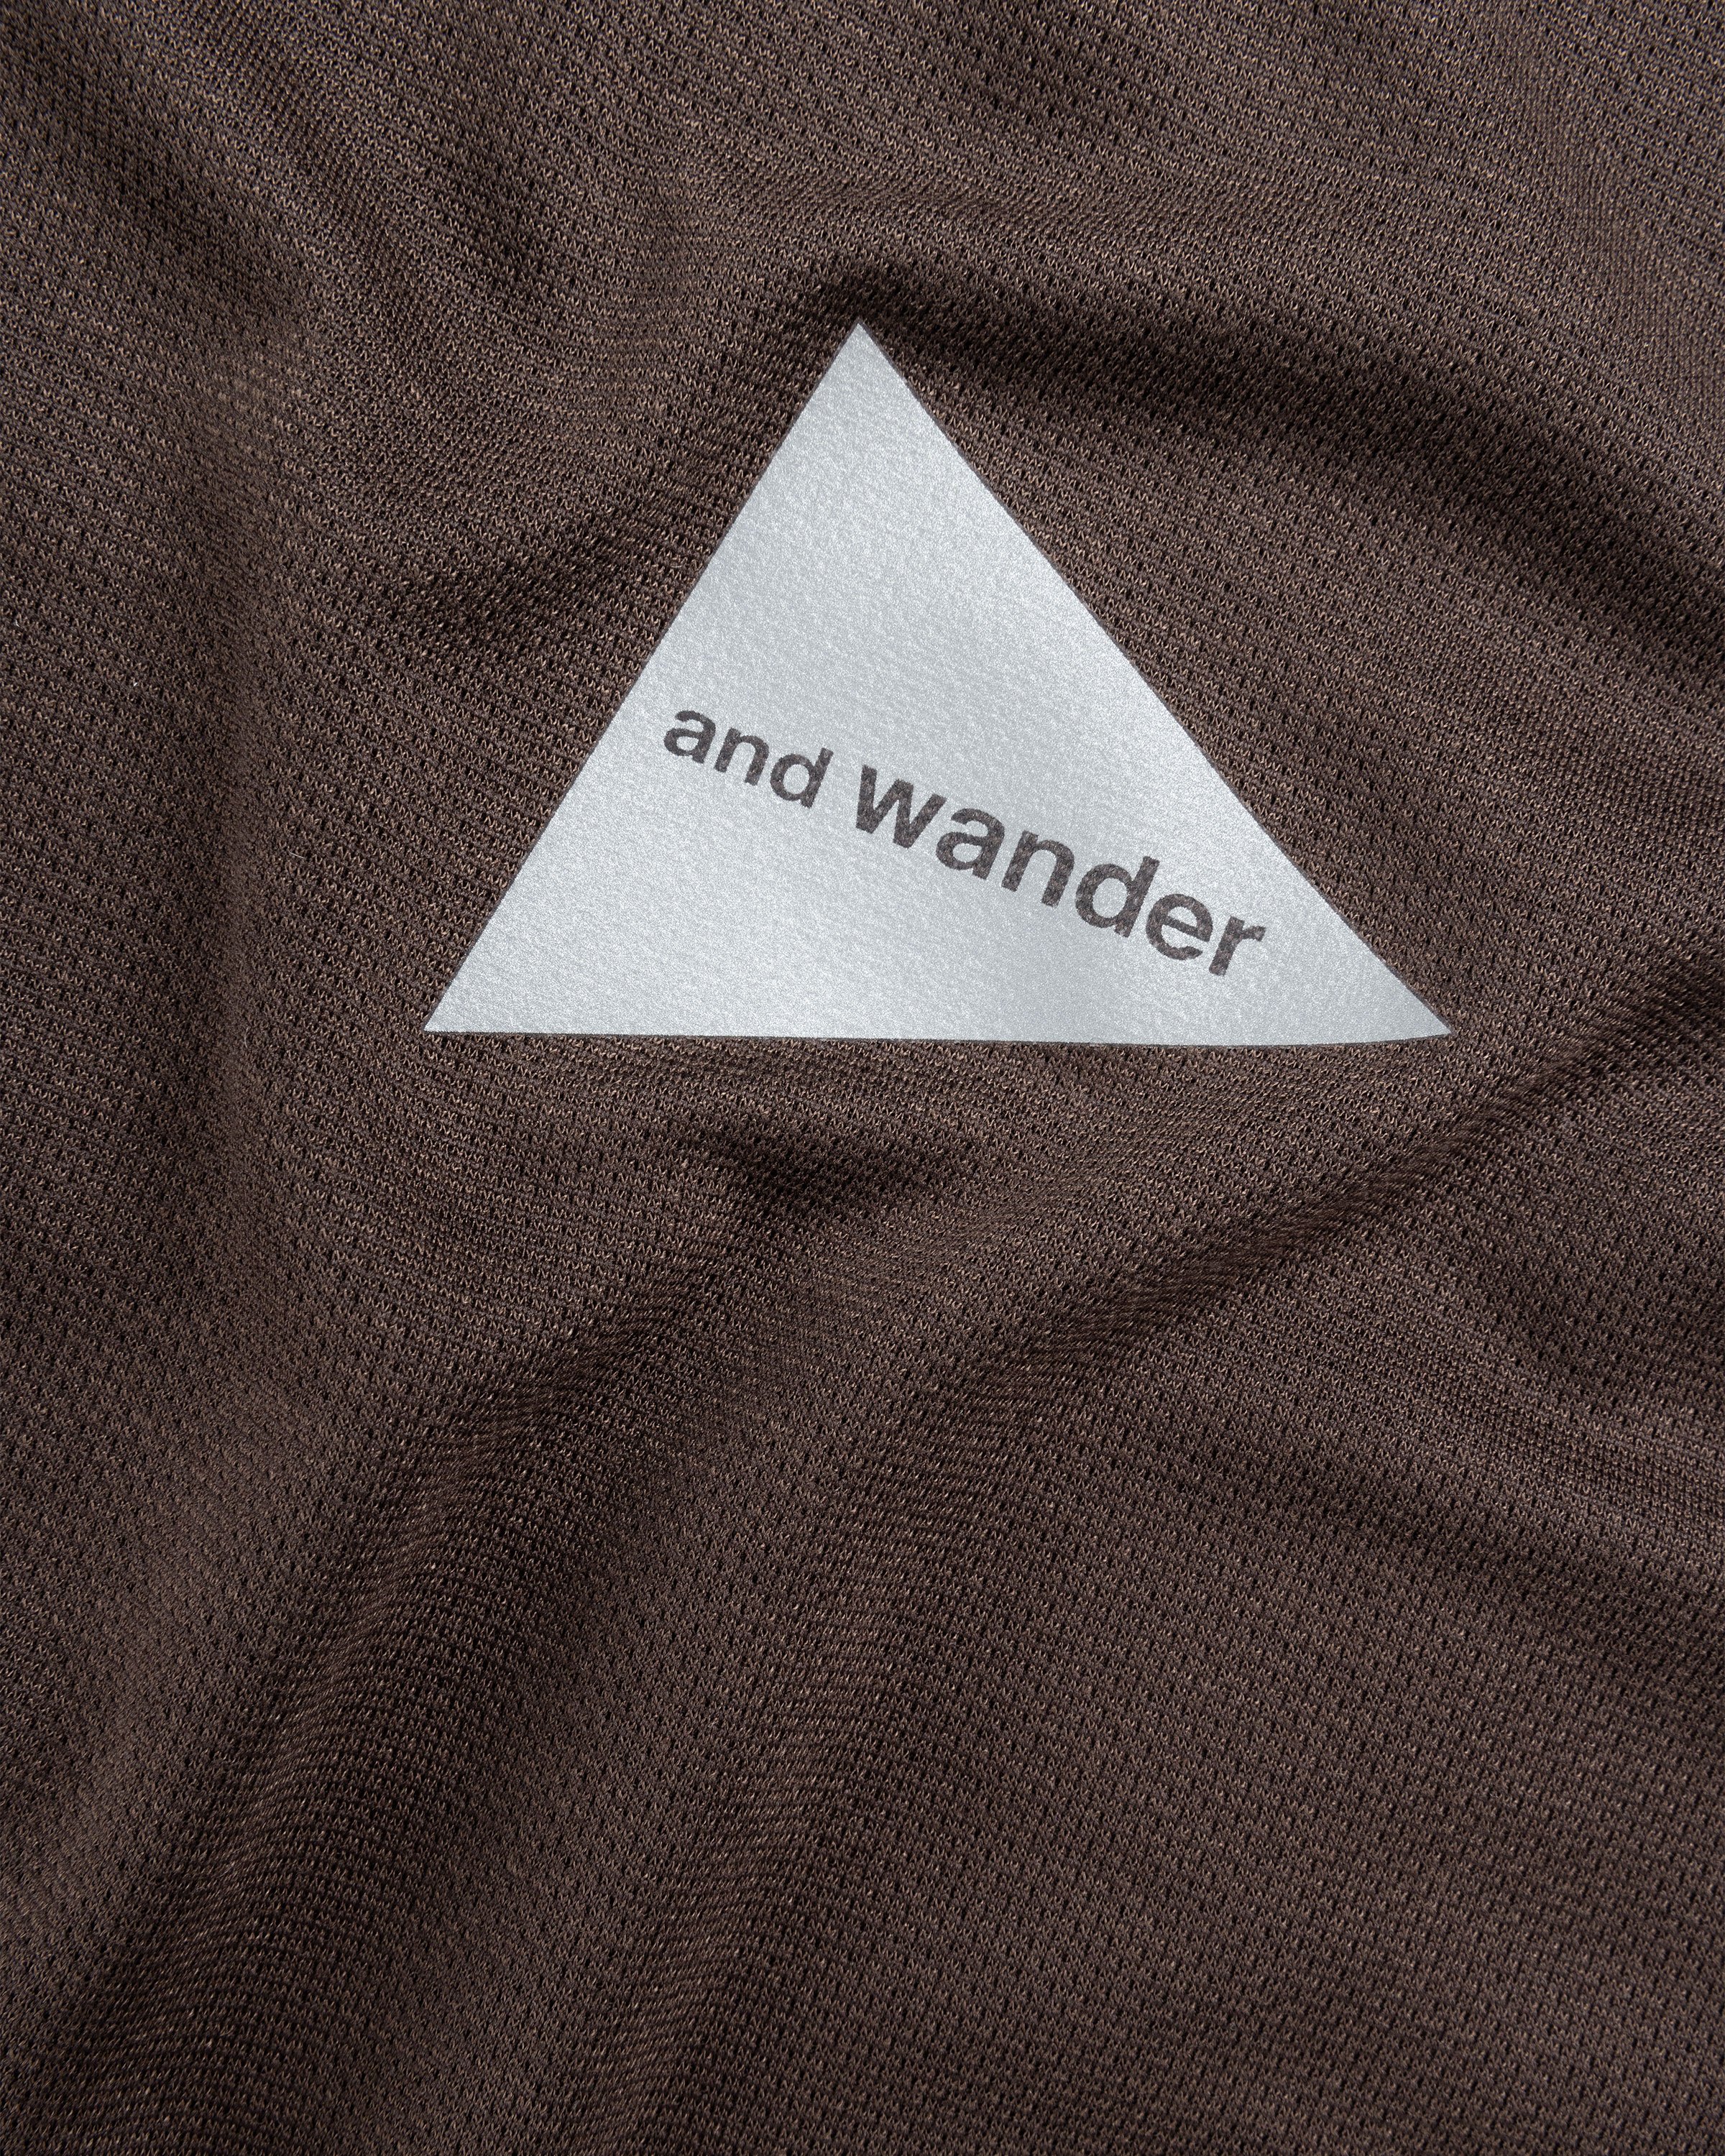 And Wander - Power Dry Jersey Raglan Long-Sleeve T-Shirt Brown - Clothing - Brown - Image 6